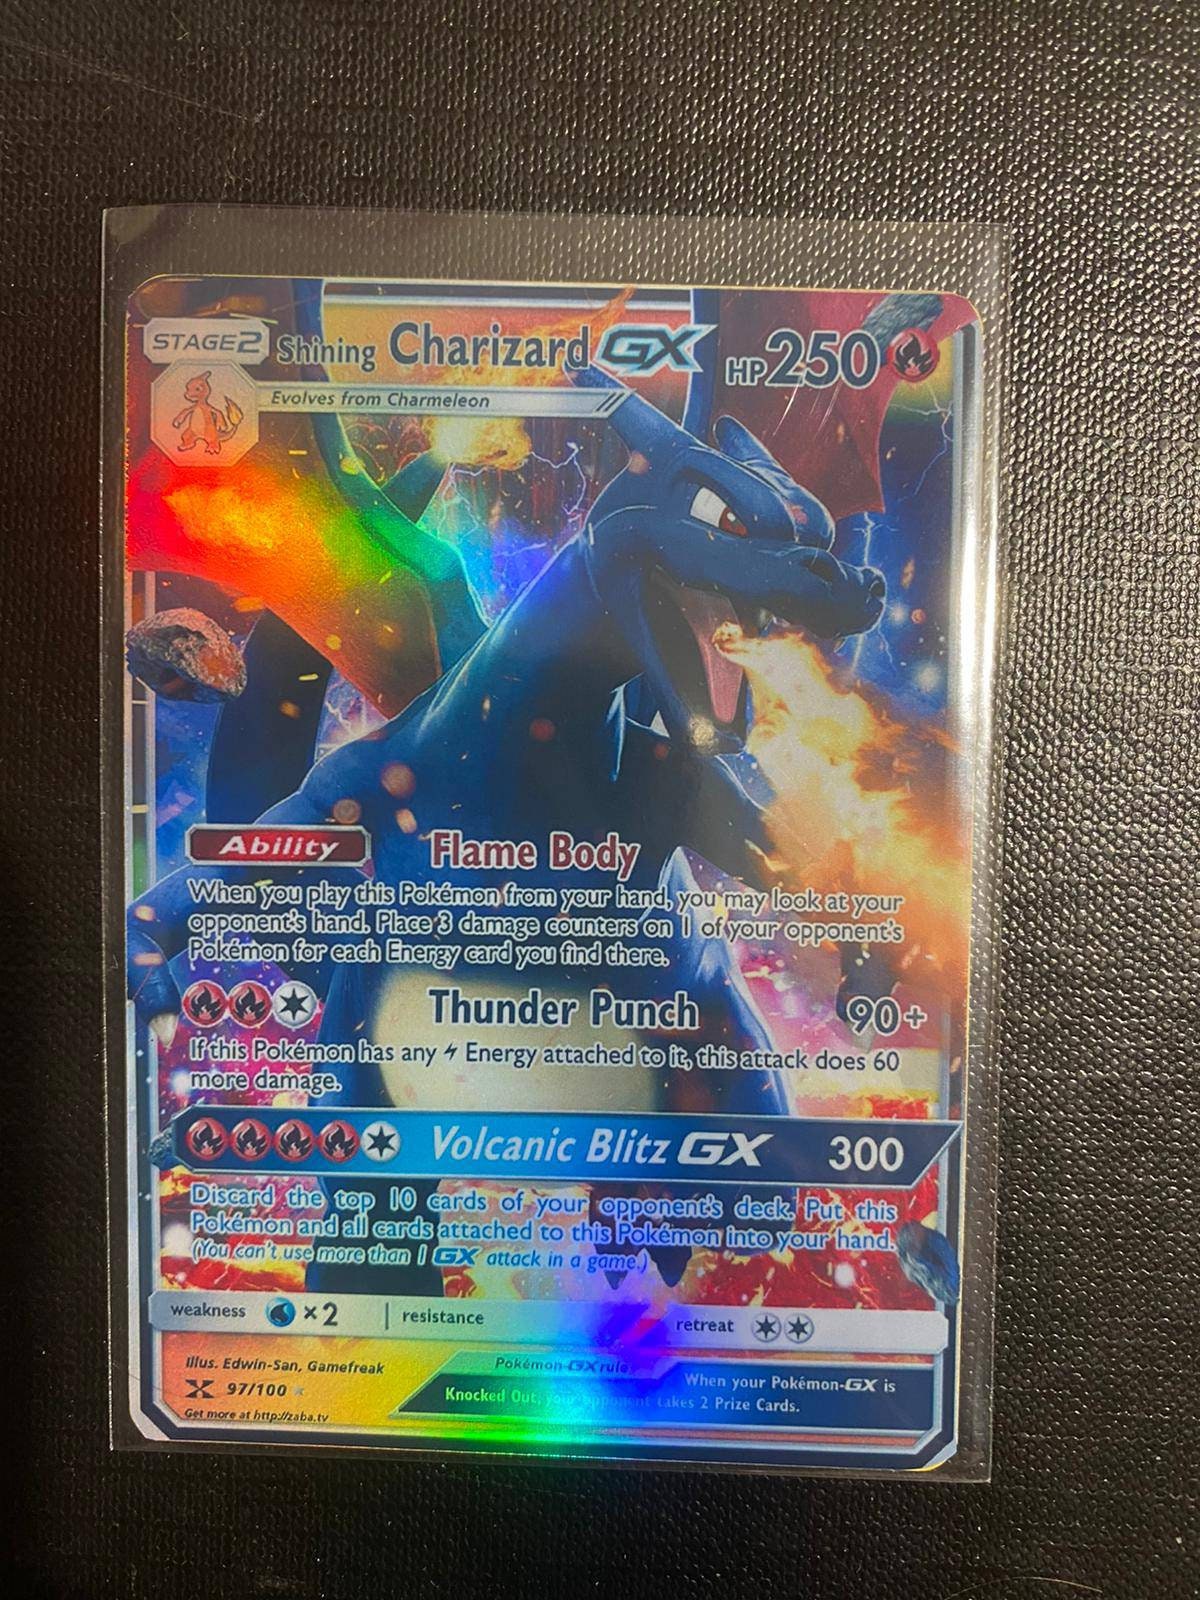 New Pokemon Cards Shining VSTAR GX EX VMAX MEGA TAG TEAM Energy Trainer  Charizard Pikachu Rare Trading Card Game Kids Toys Gift – the best products  in